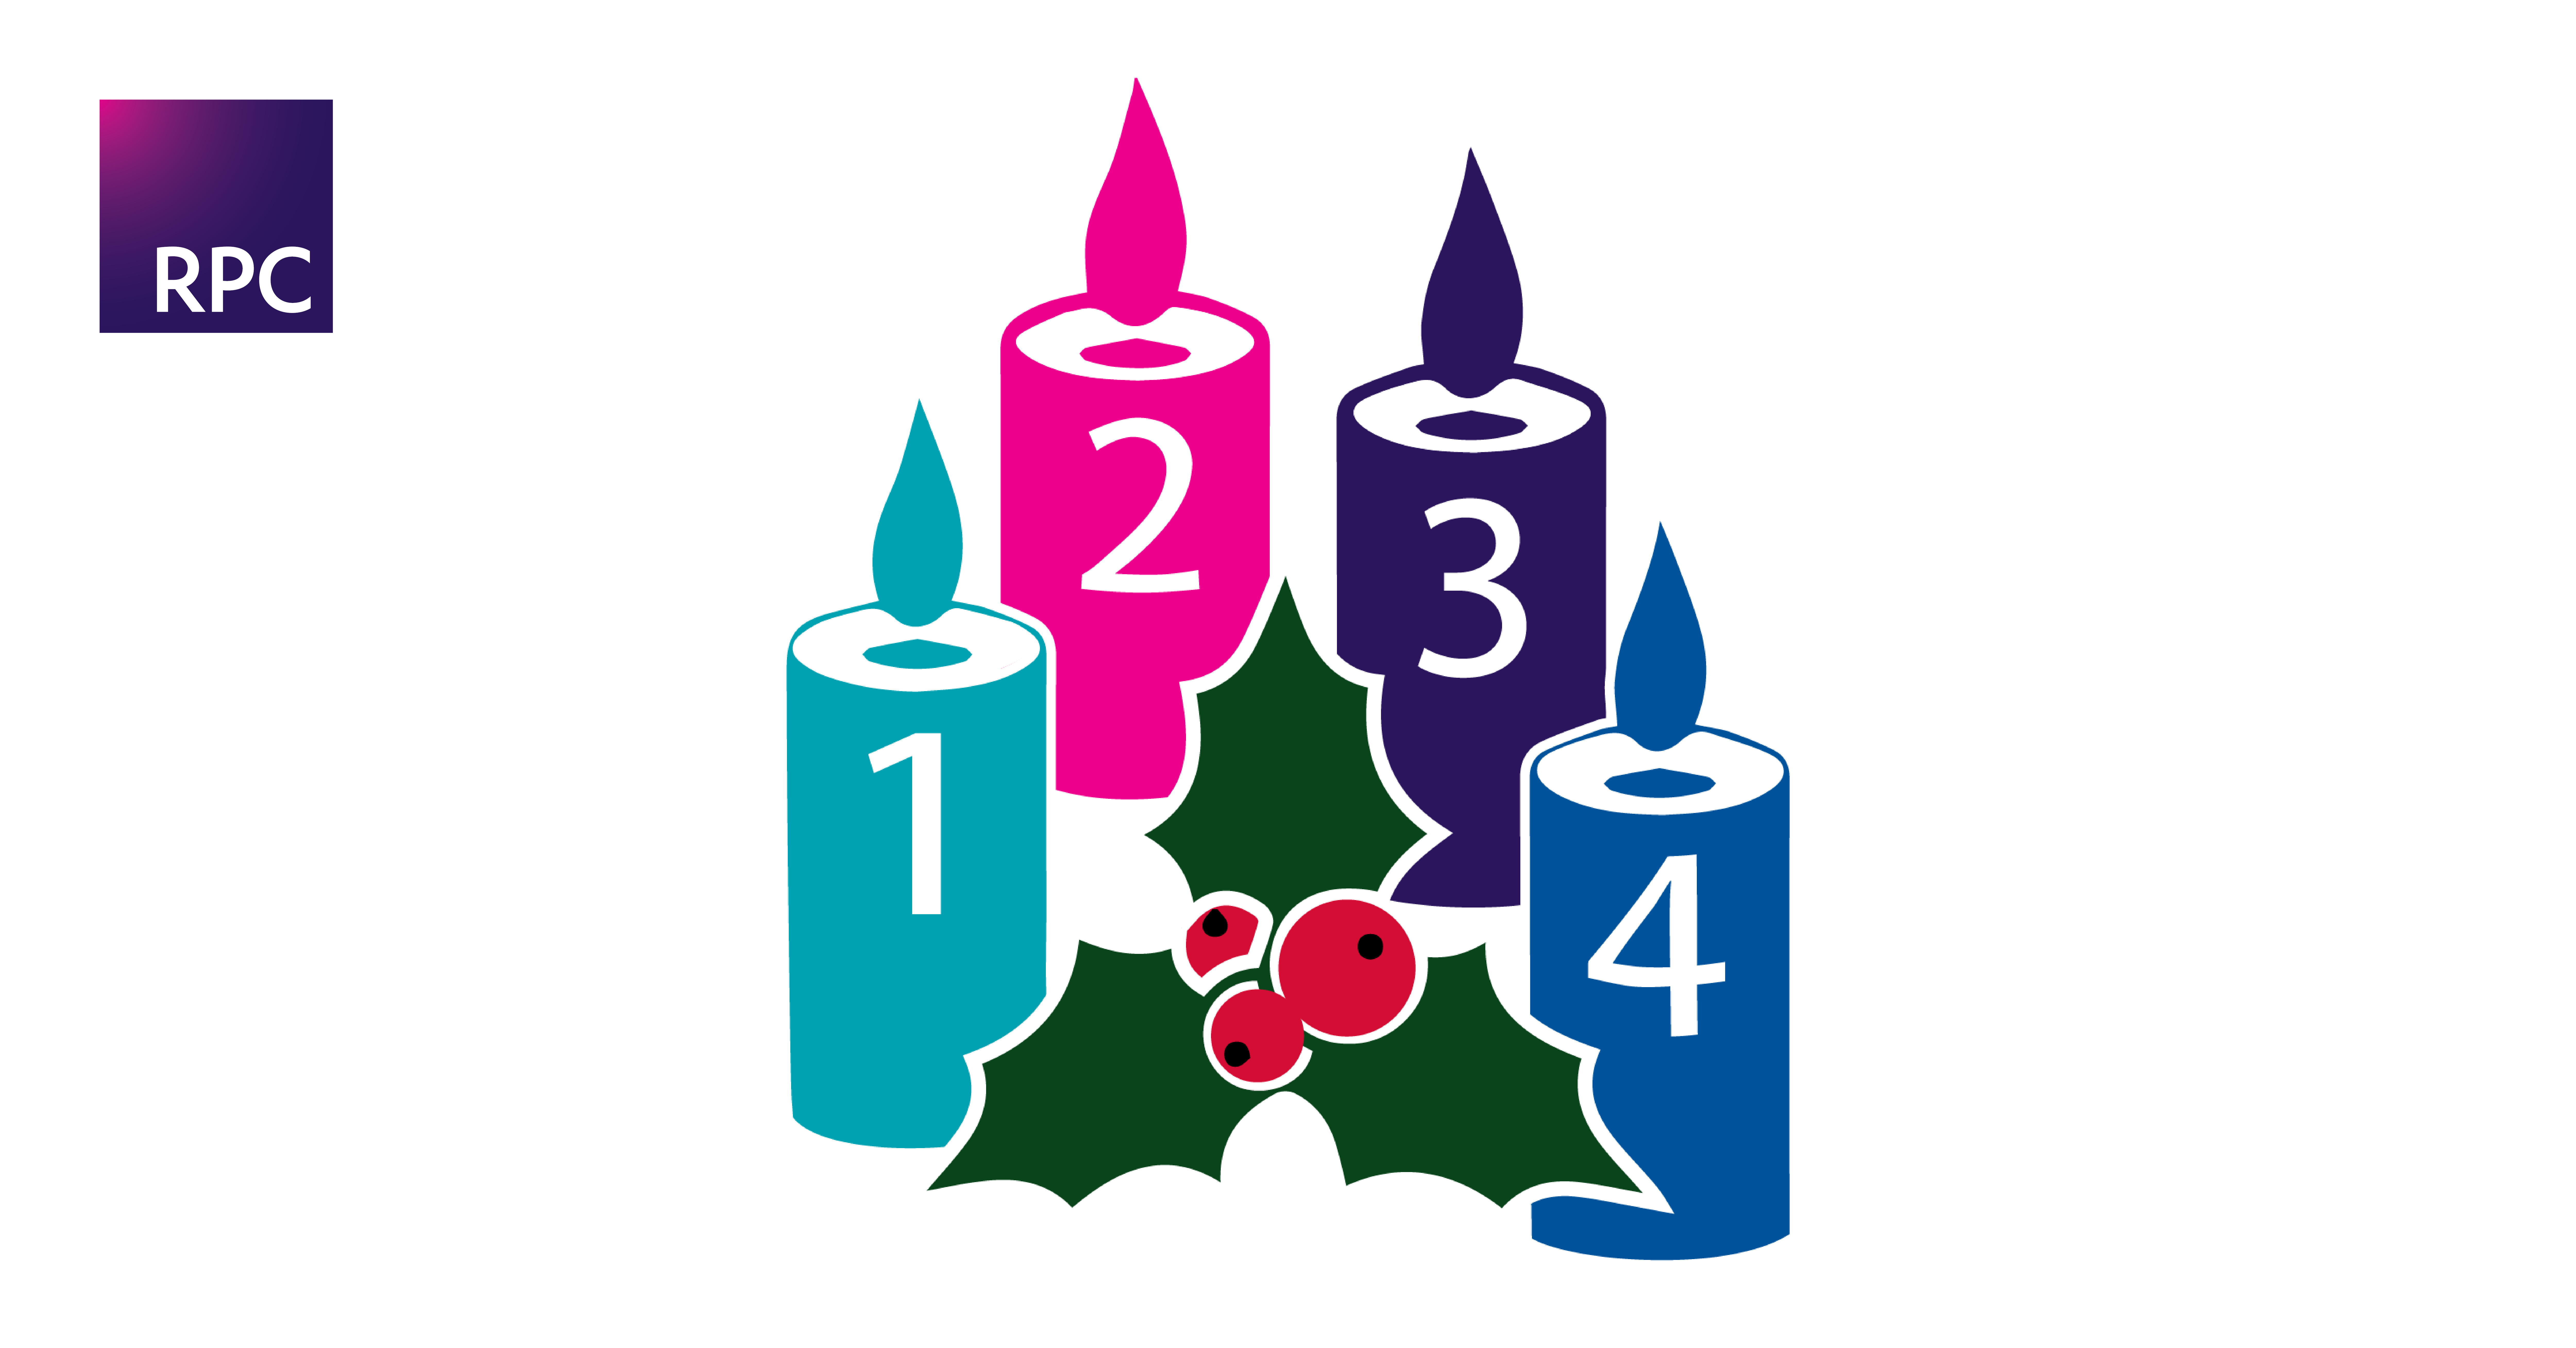 Advent candle quiz RPC law week 4